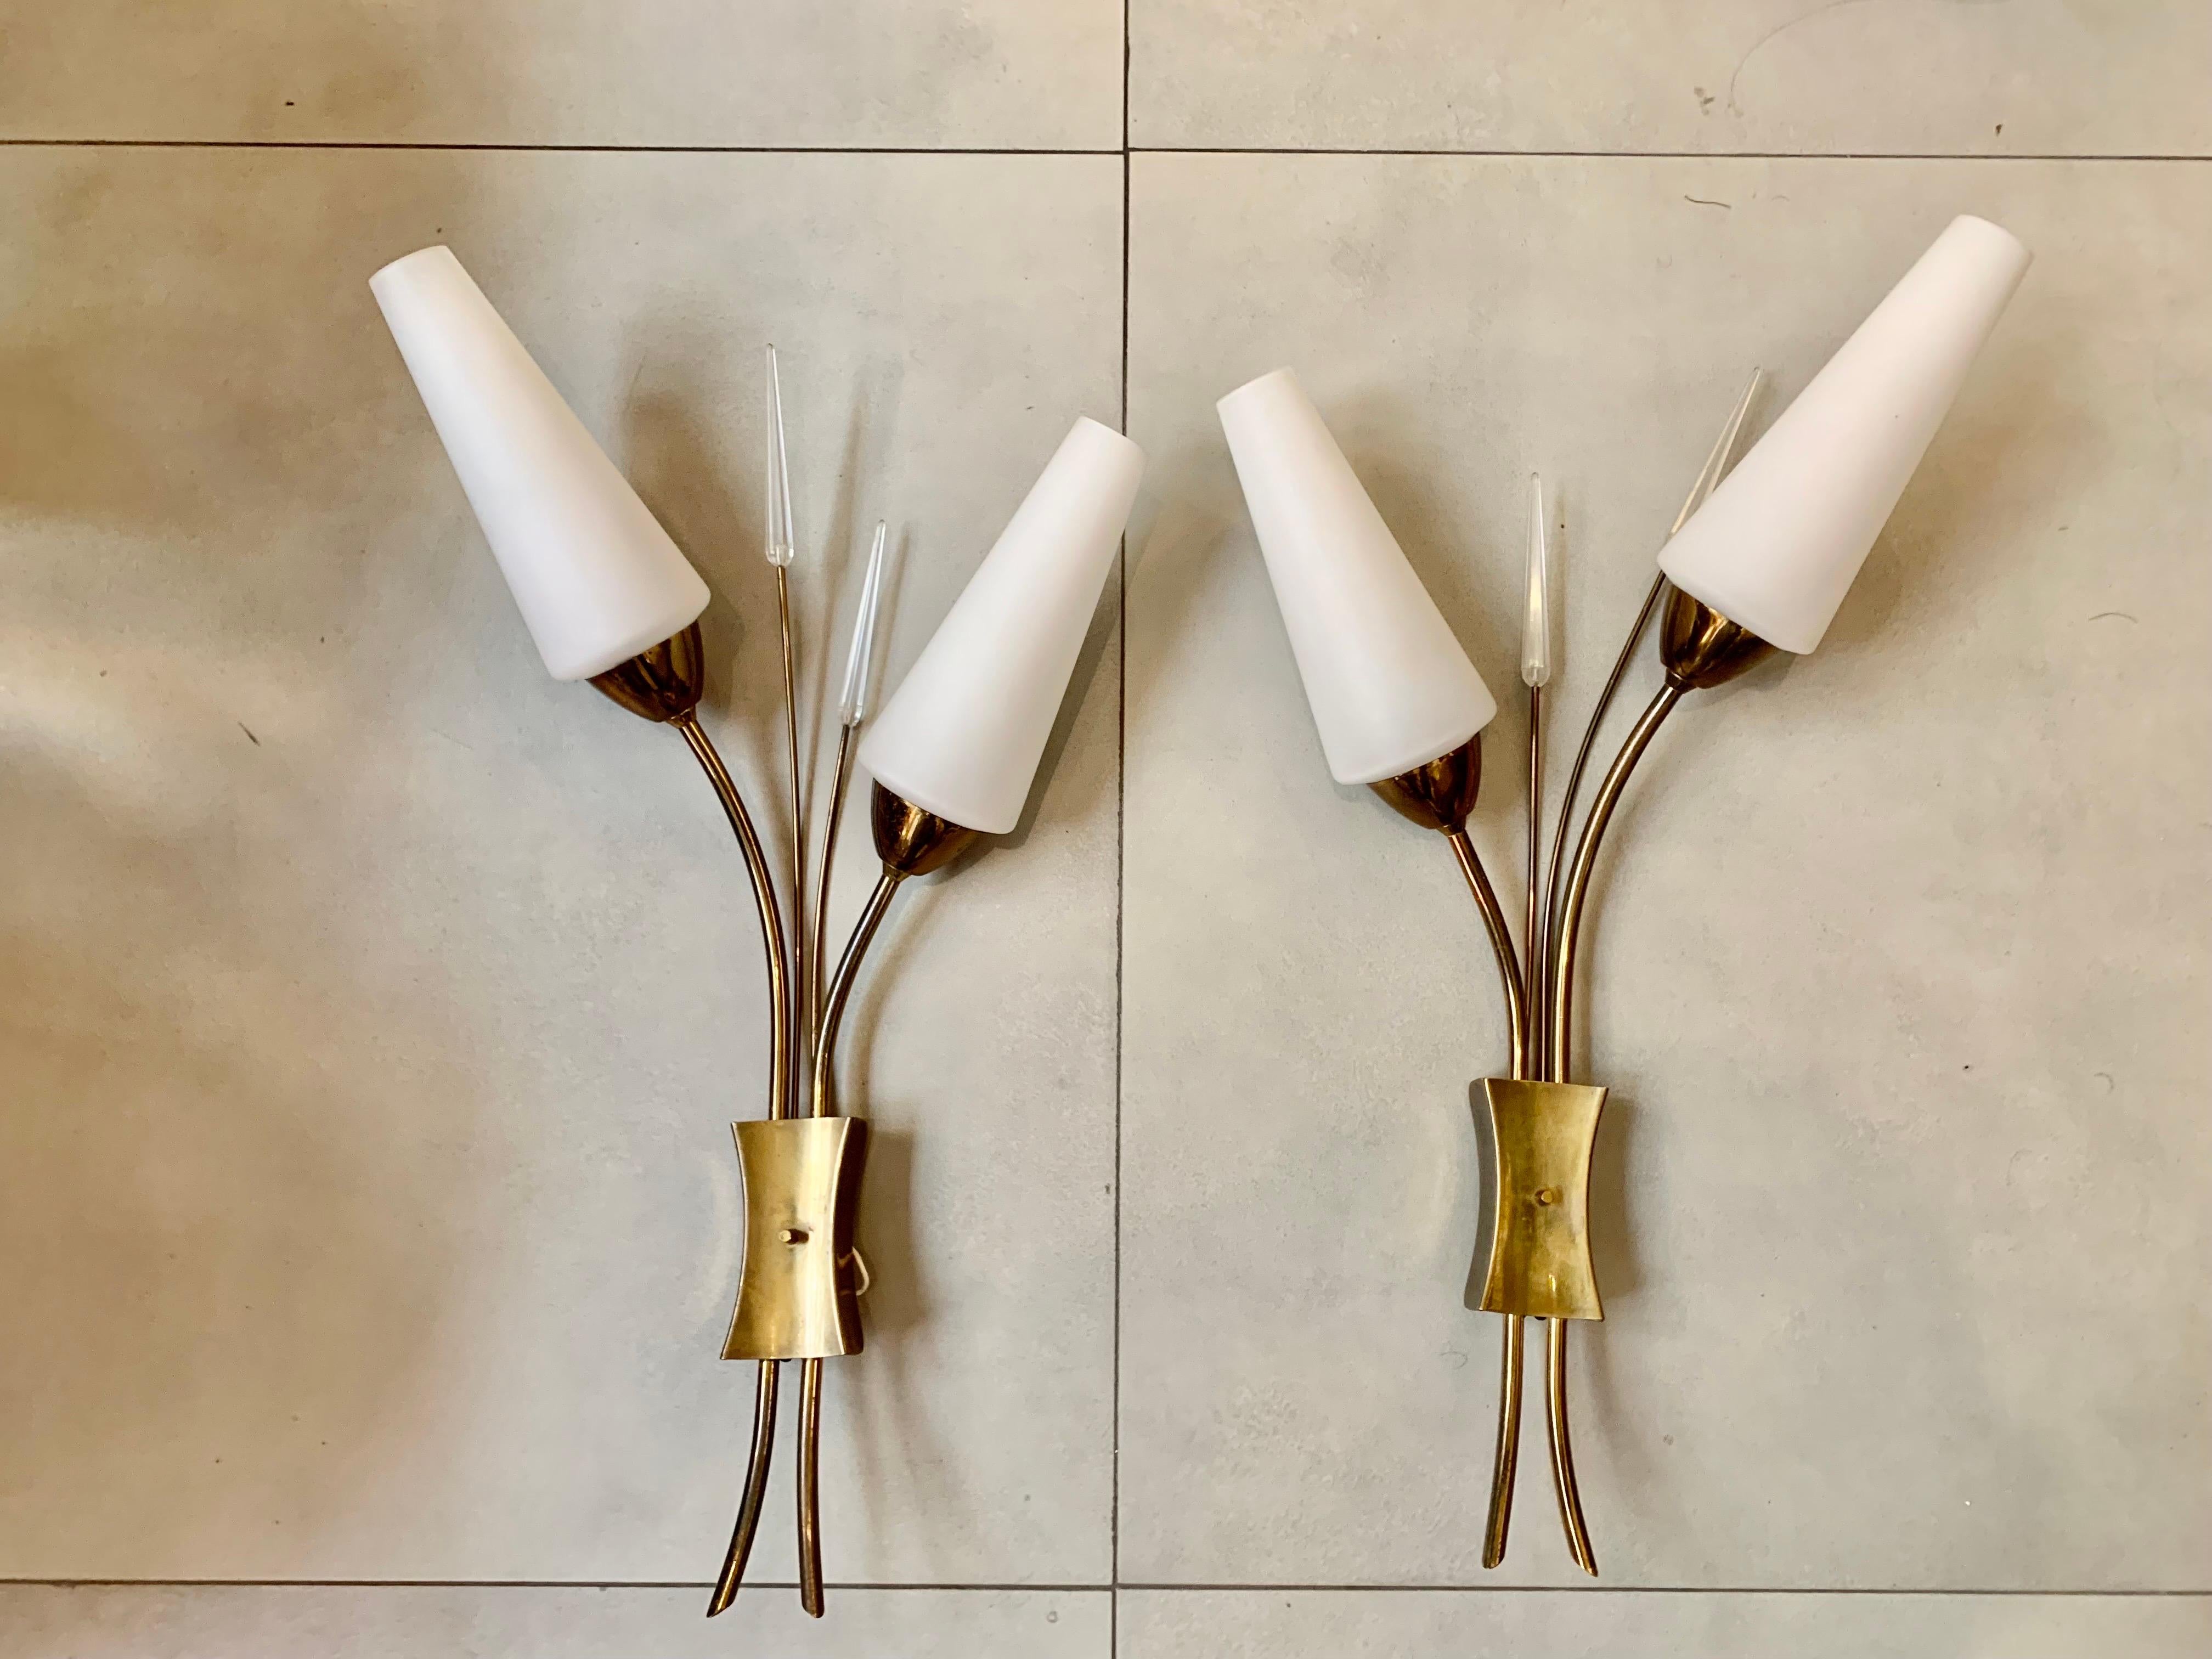 Pair of 1950s wall sconces, design Maison Lunel, France, they are double sconces, in brass metal, with glass trim, and white opaline lampshades. Prepared for electrical operation in the USA.